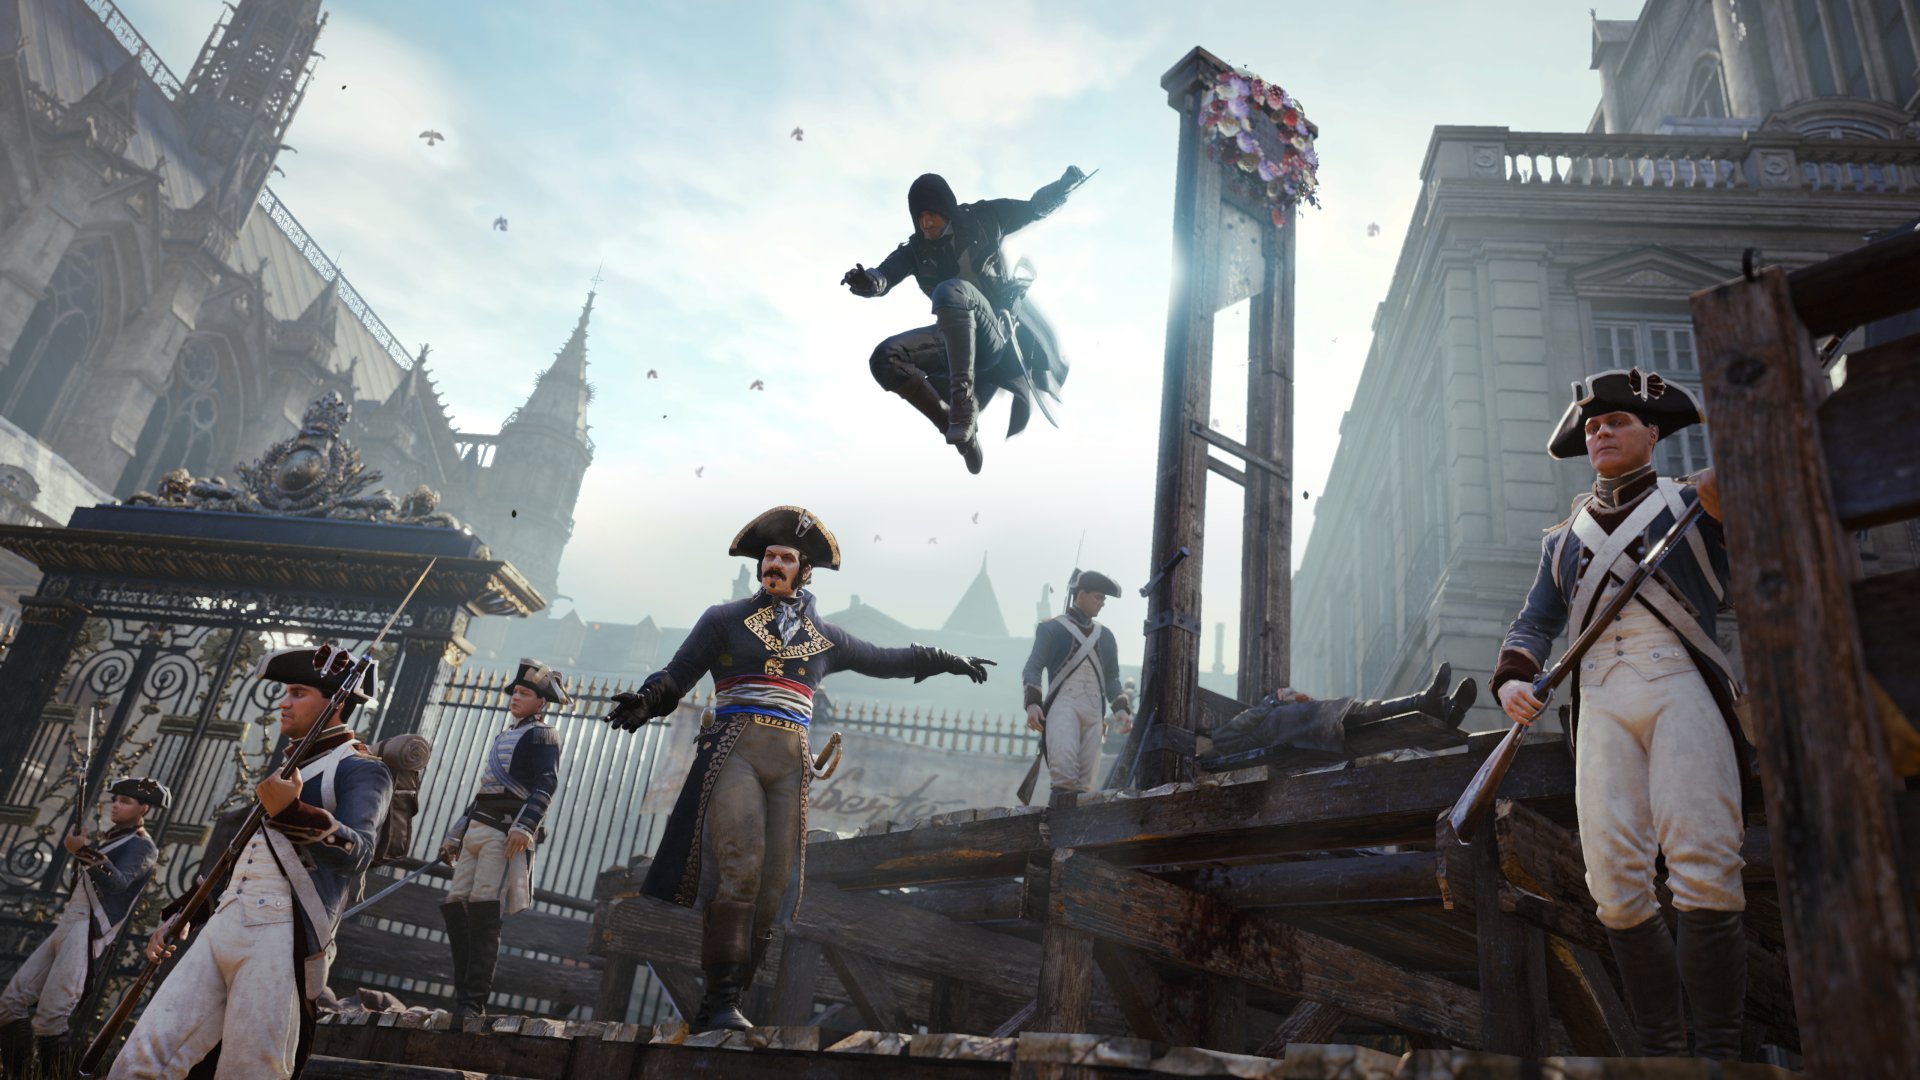 assassin’s creed syndicate pc requirements